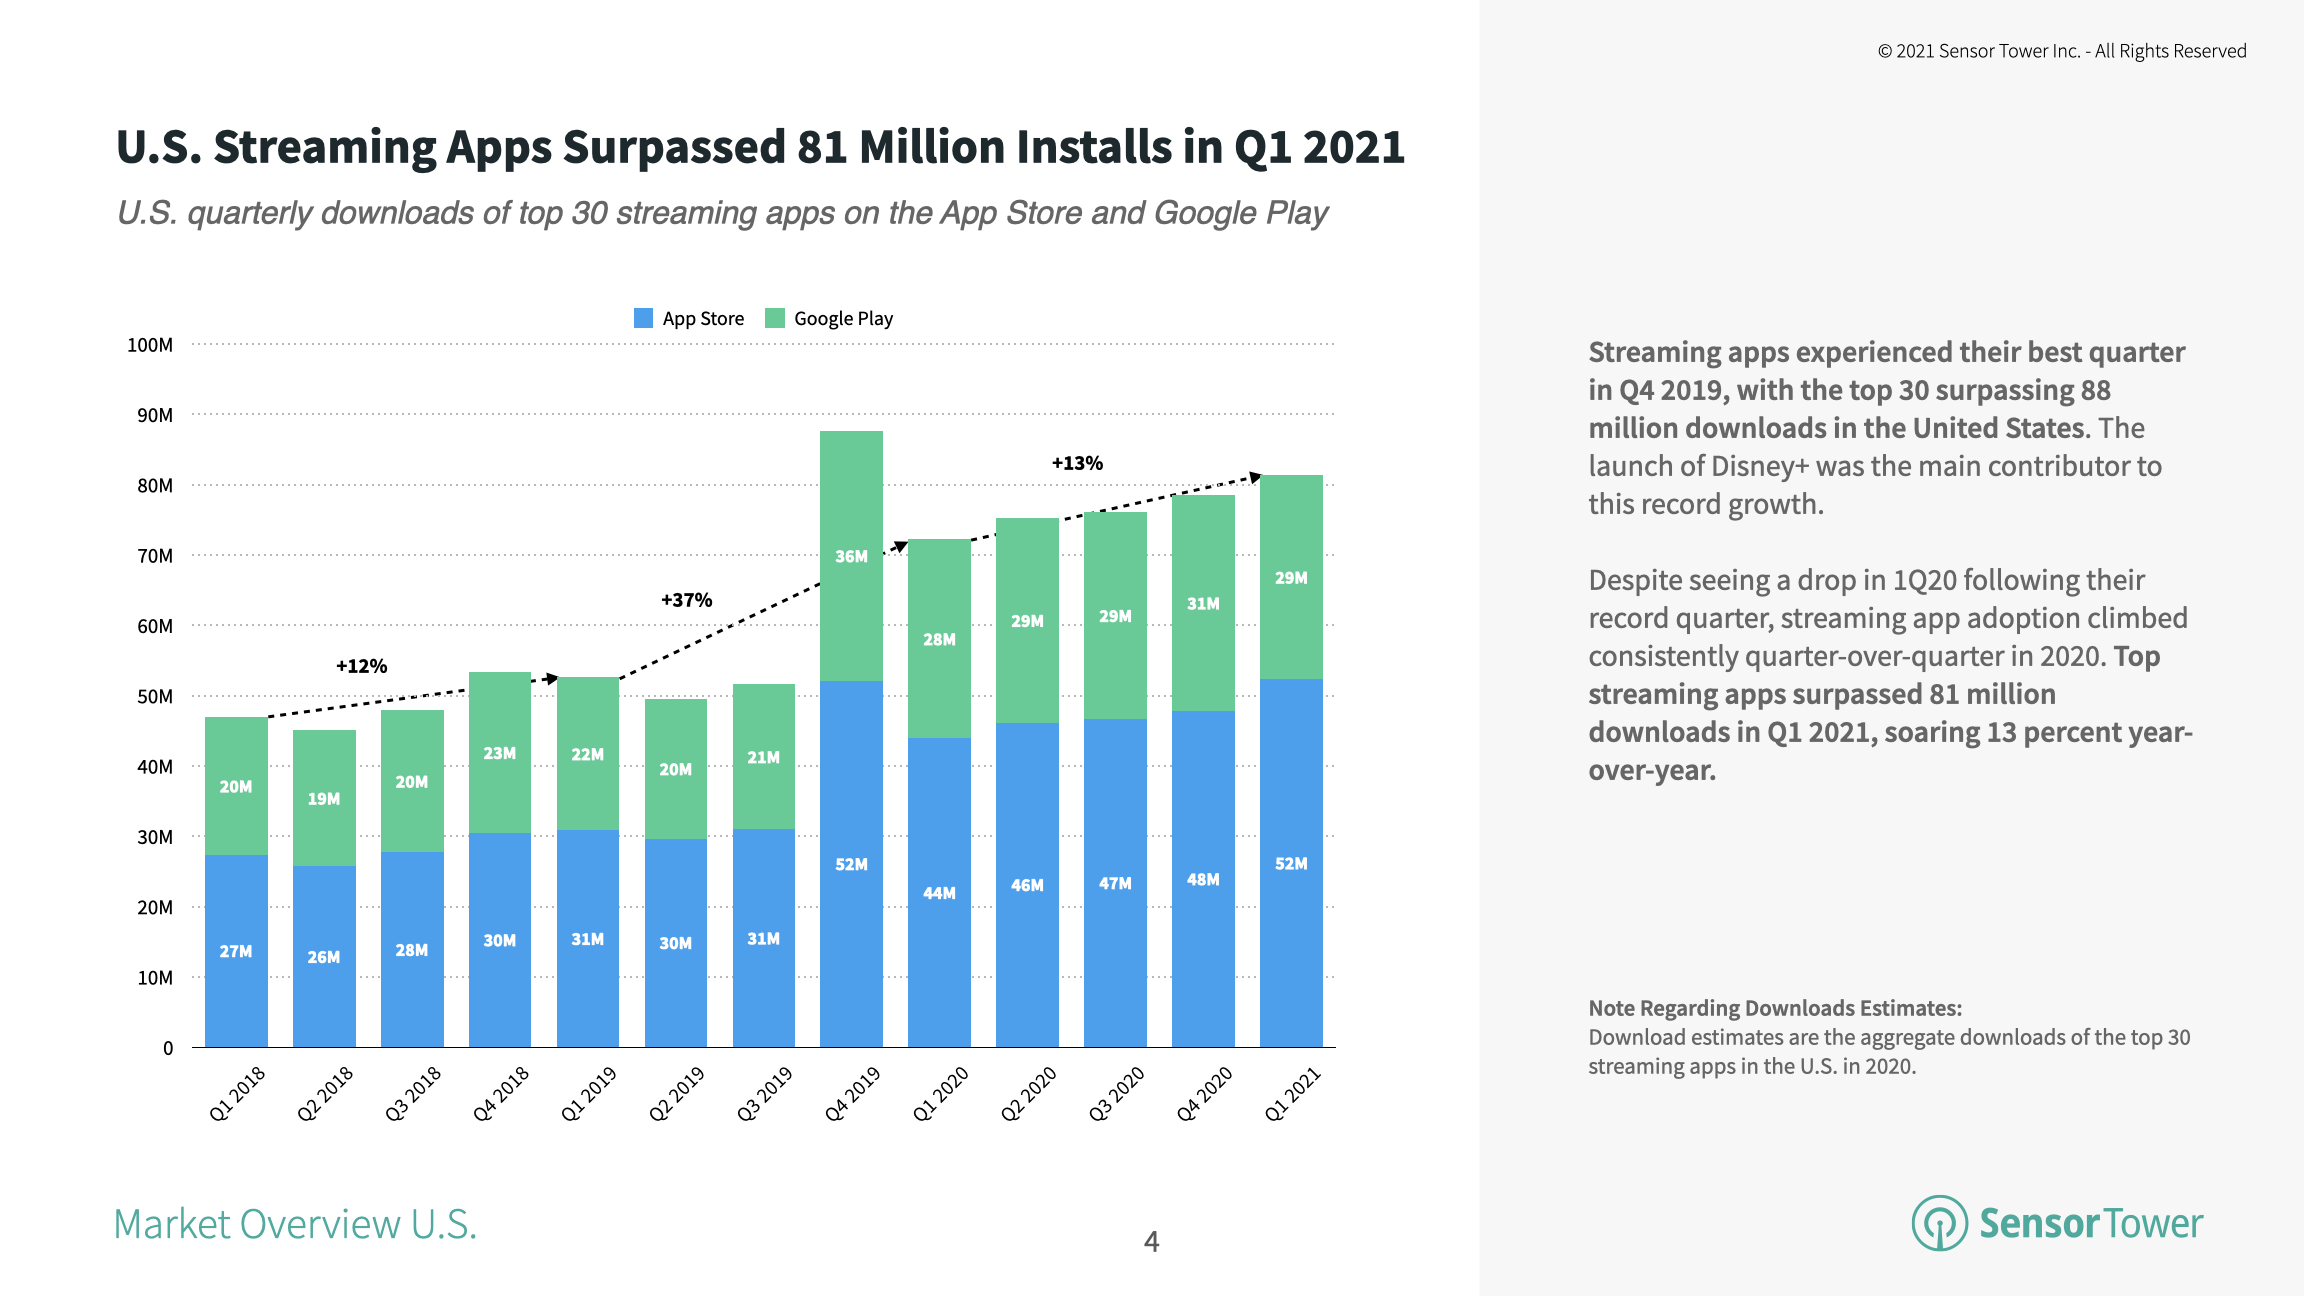 The top U.S. streaming apps climbed 13 percent year-over-year to 81 million downloads in 1Q21.